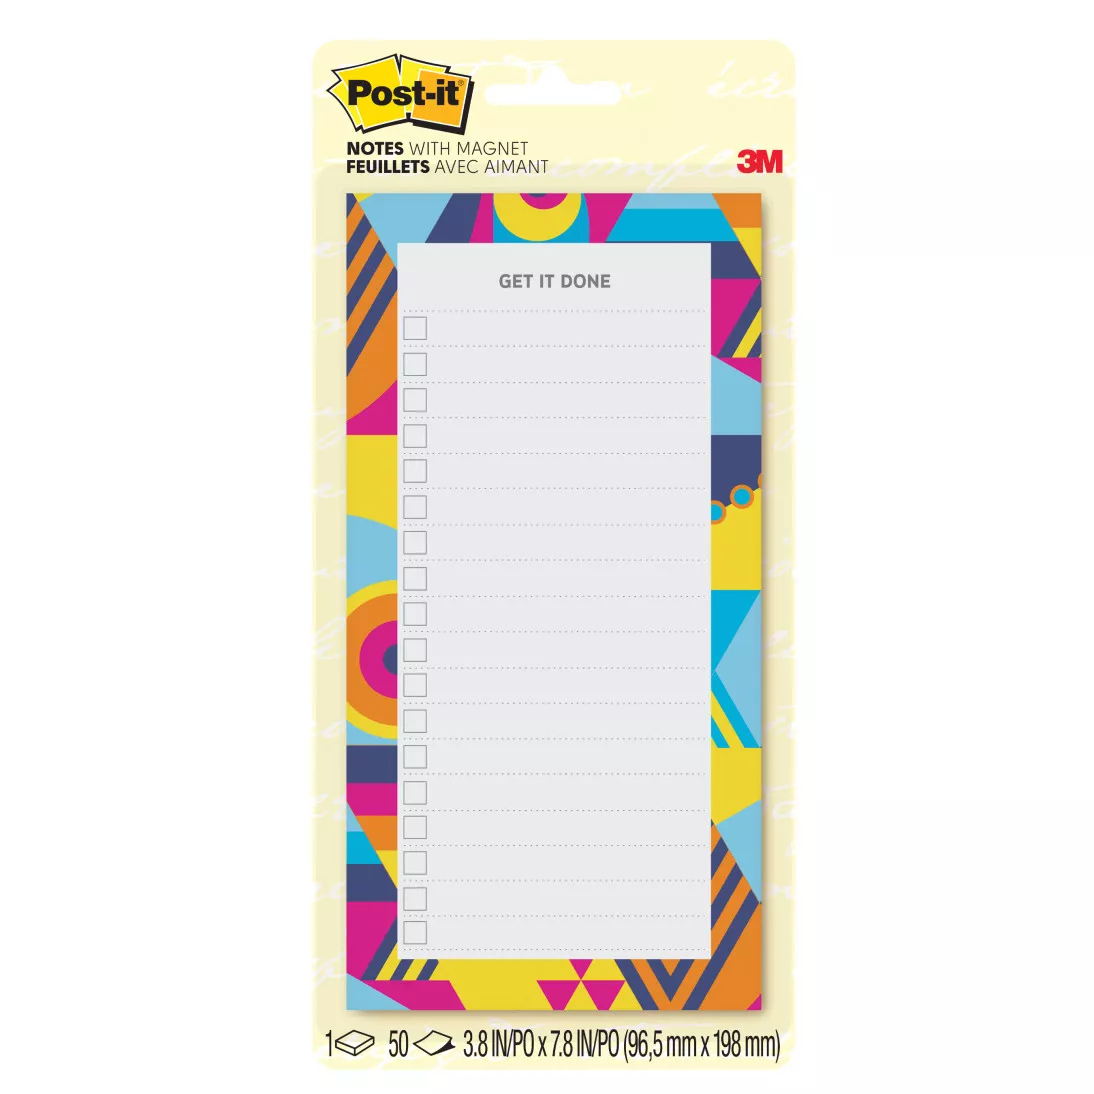 Post-it® Notes BC-LIST-OBRT, 3.8 in x 7.8 in (96.5 mm x 198 mm)